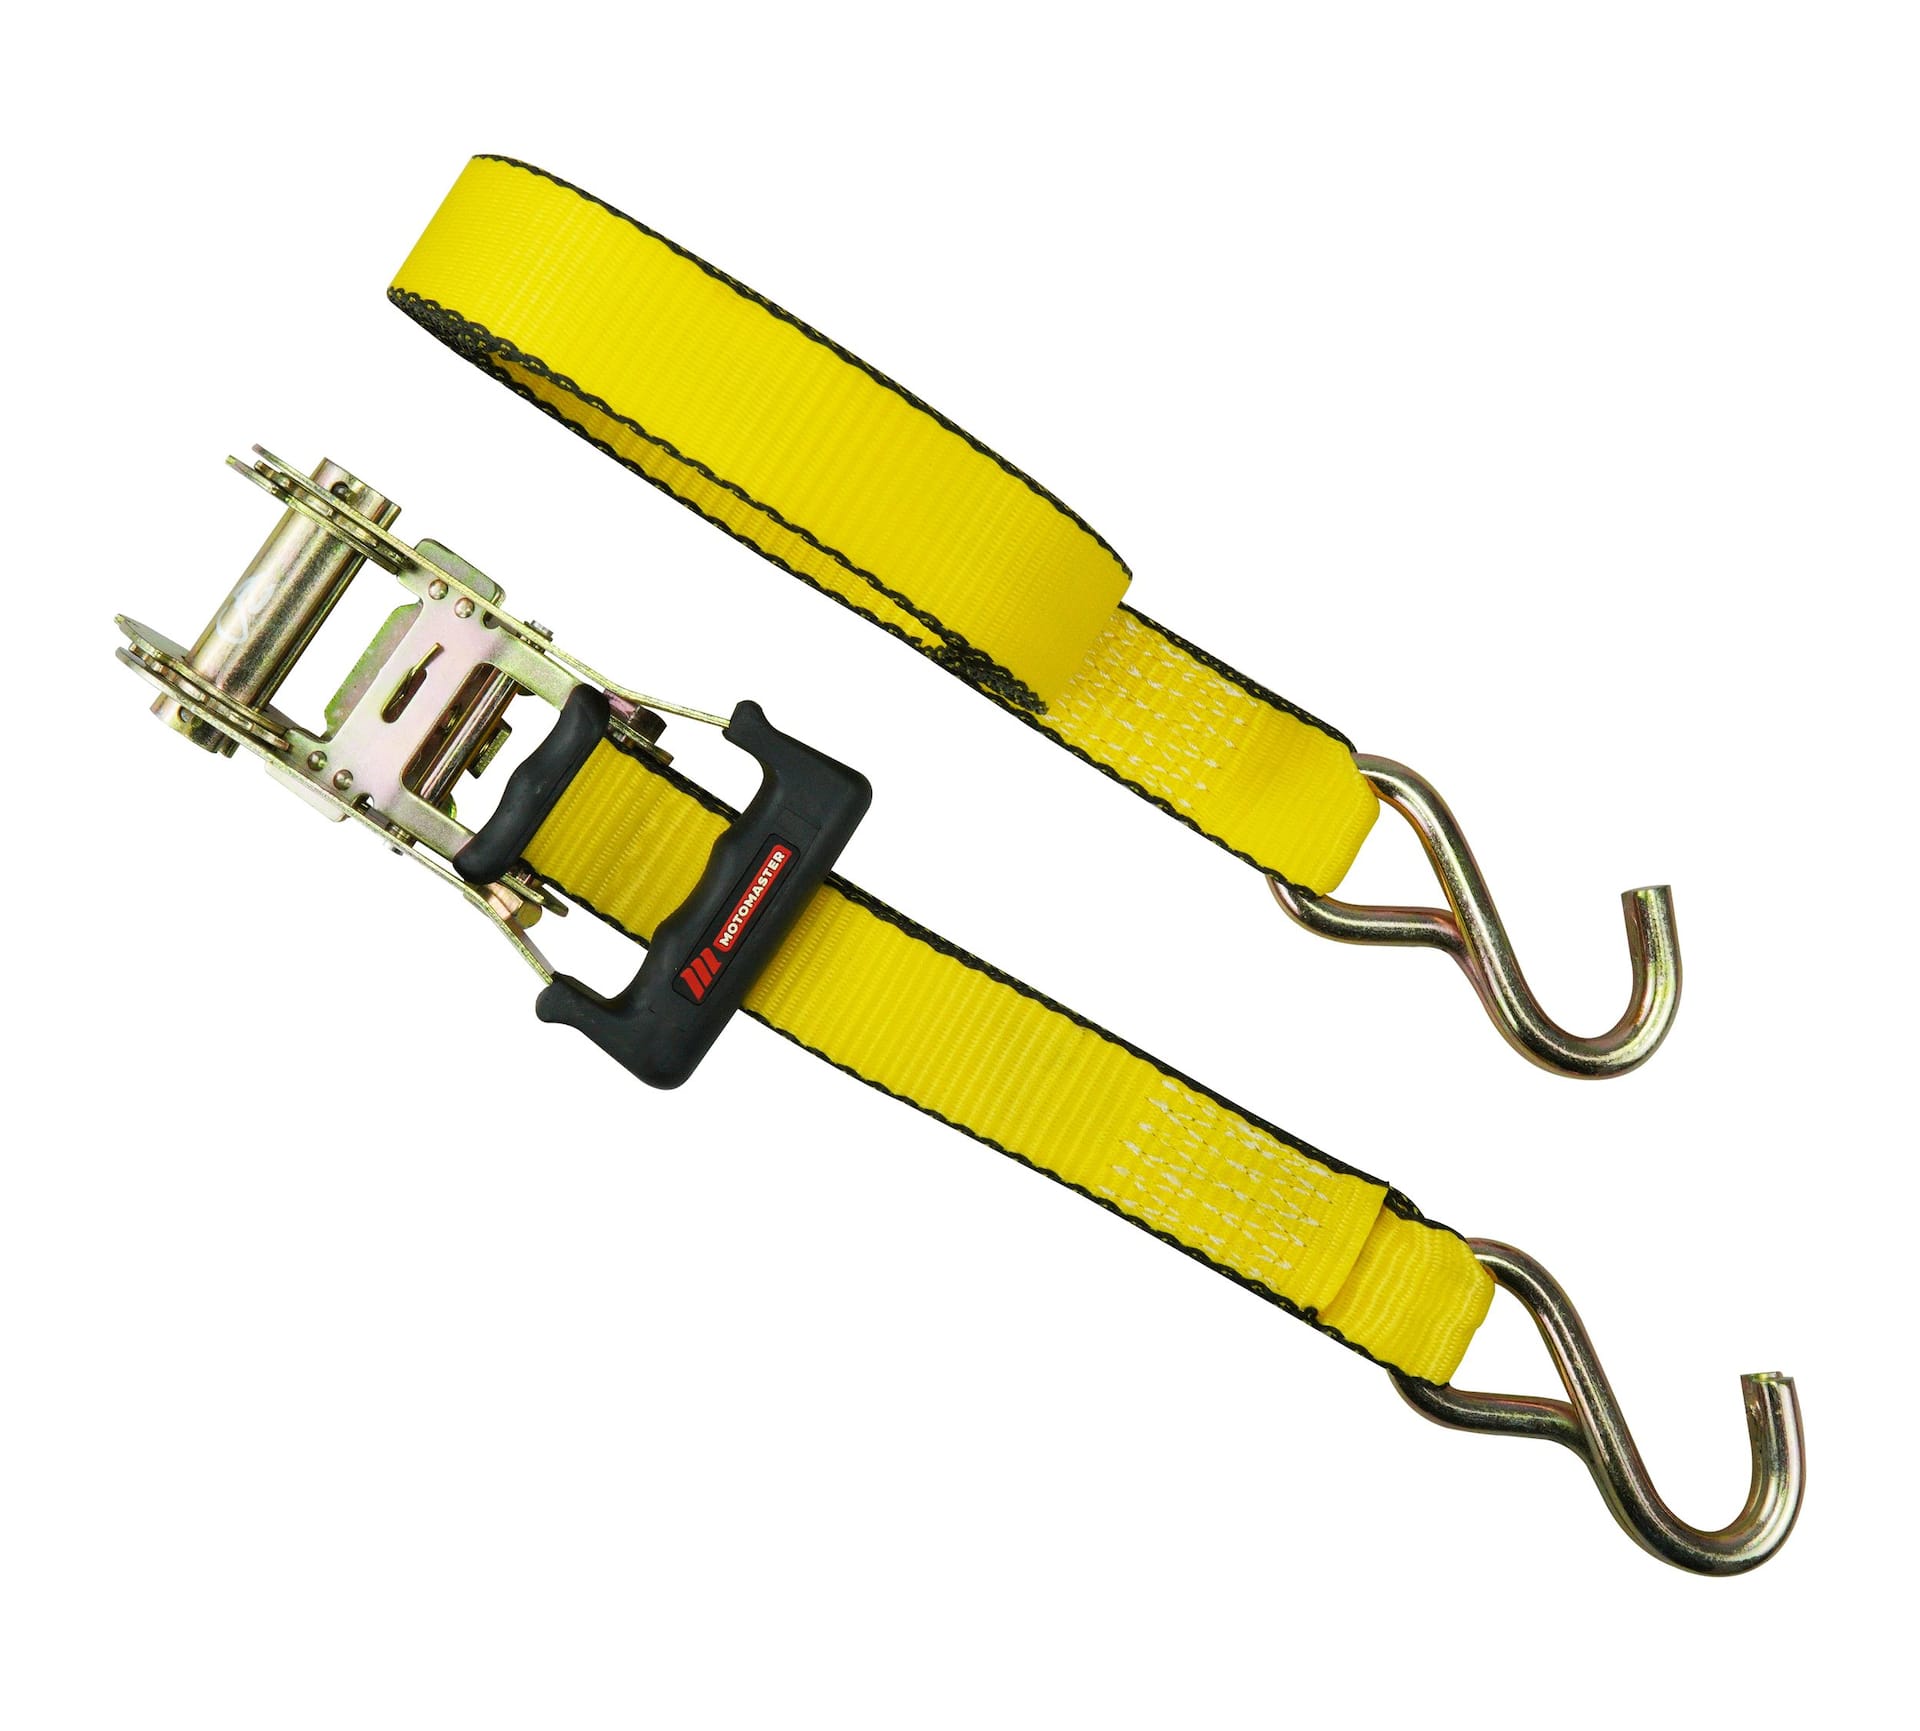 ShockStrap 10,000lb 2 Ratchet Strap with Snap Hooks Product Video 